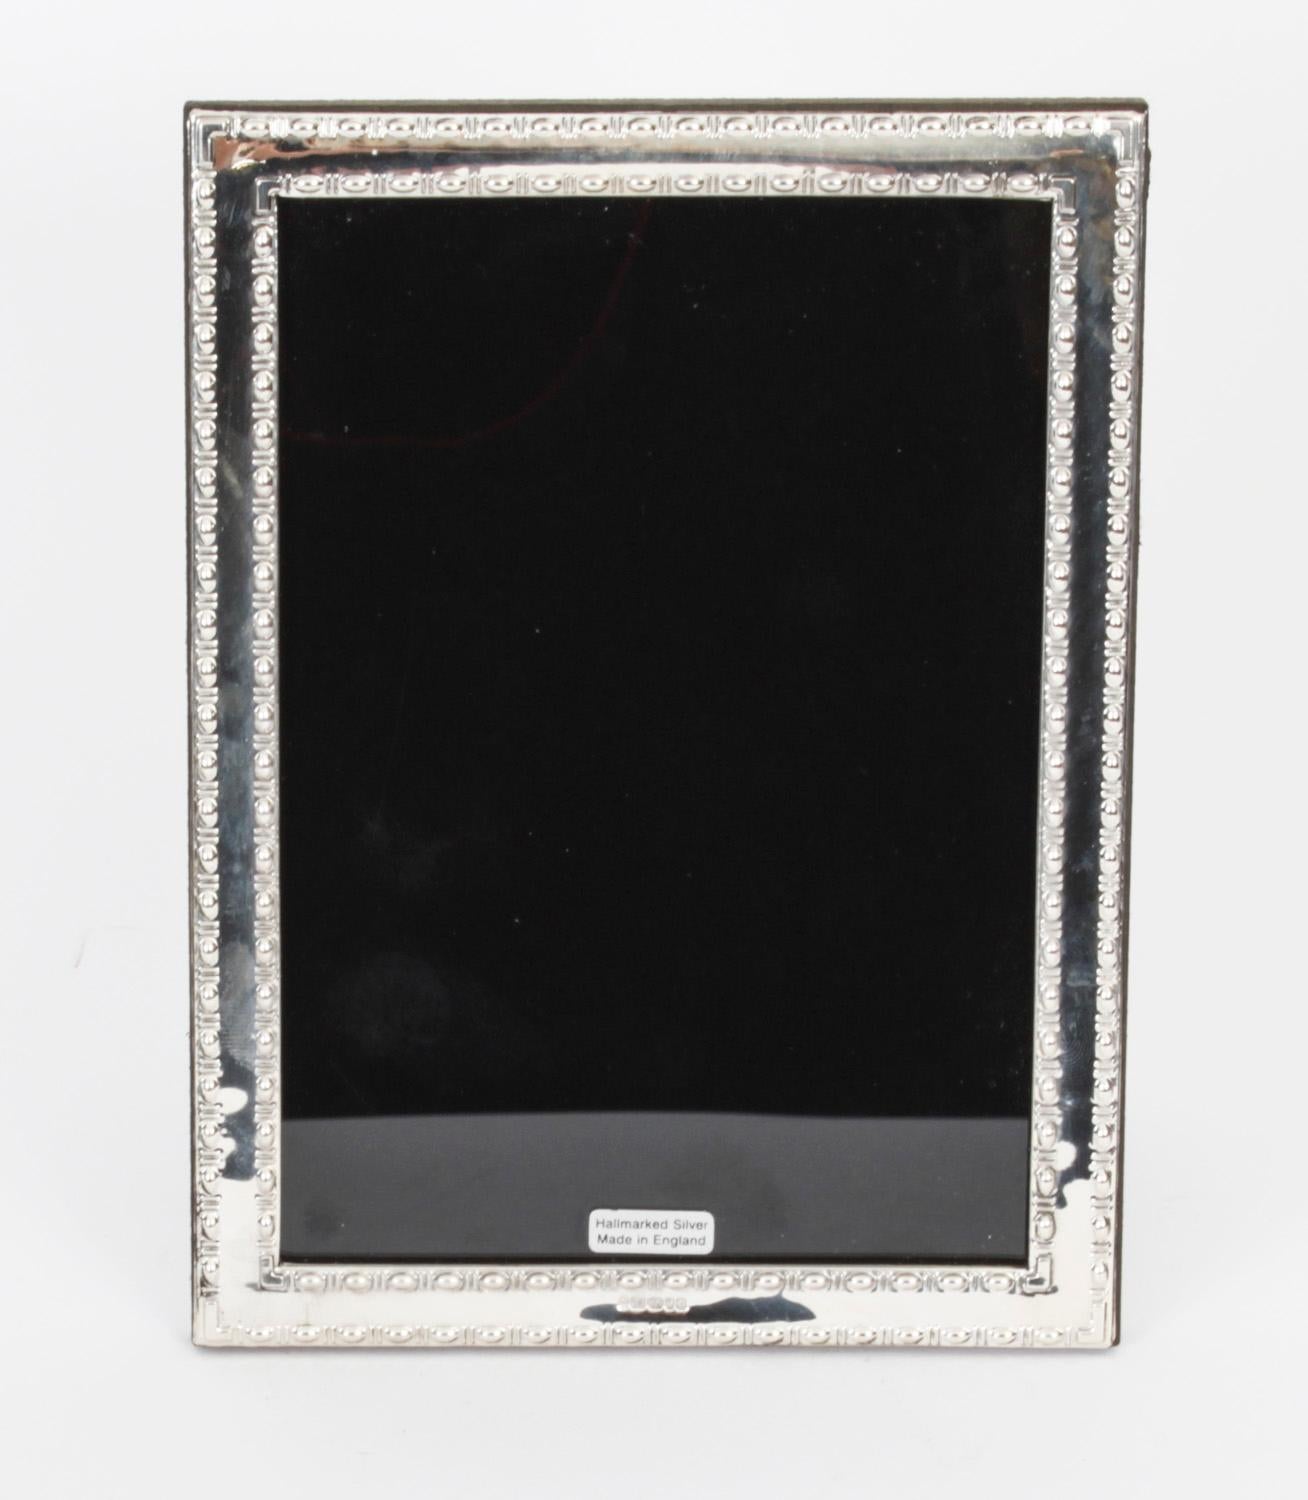 A truly superb pair of Vintage Neo-classical sterling silver photo frames,  by Harry Frane, London Dated  2012.

The beautiful rectangular shaped photo frames are superbly decorated with egg and dart banding.

An excellent gift idea for many